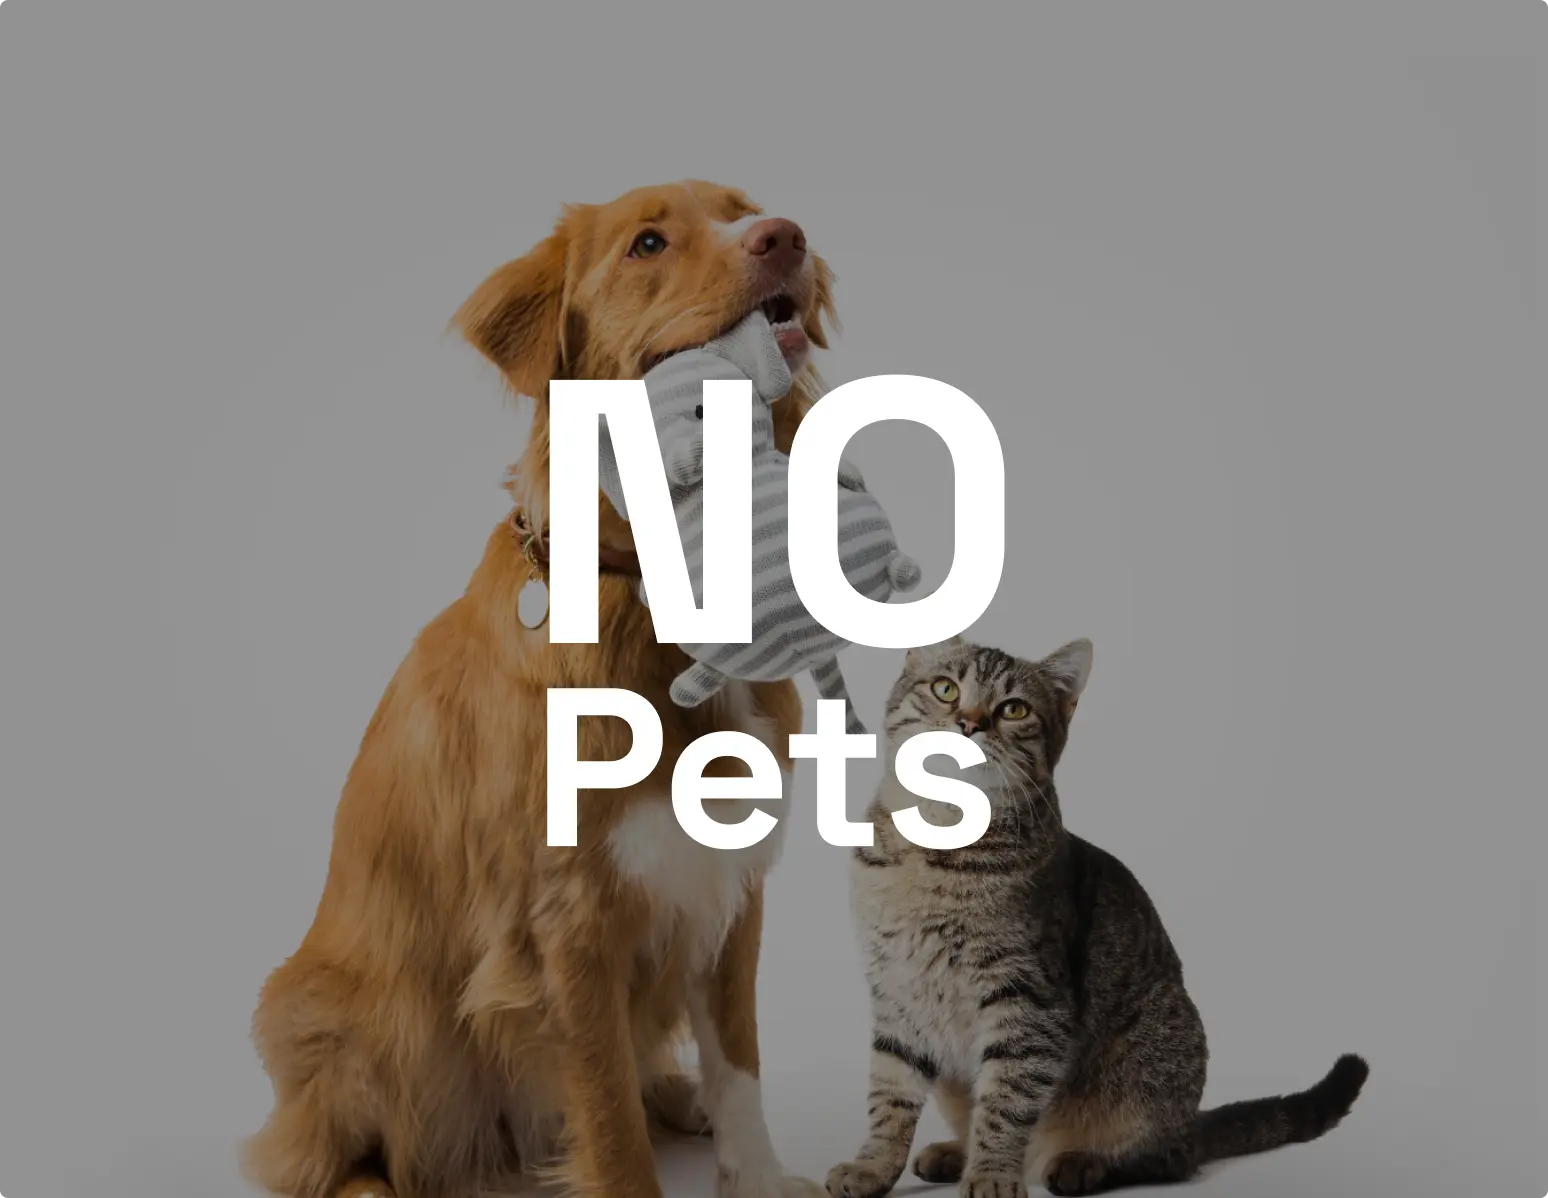 Cat and Dog sitting with 'NO' over both